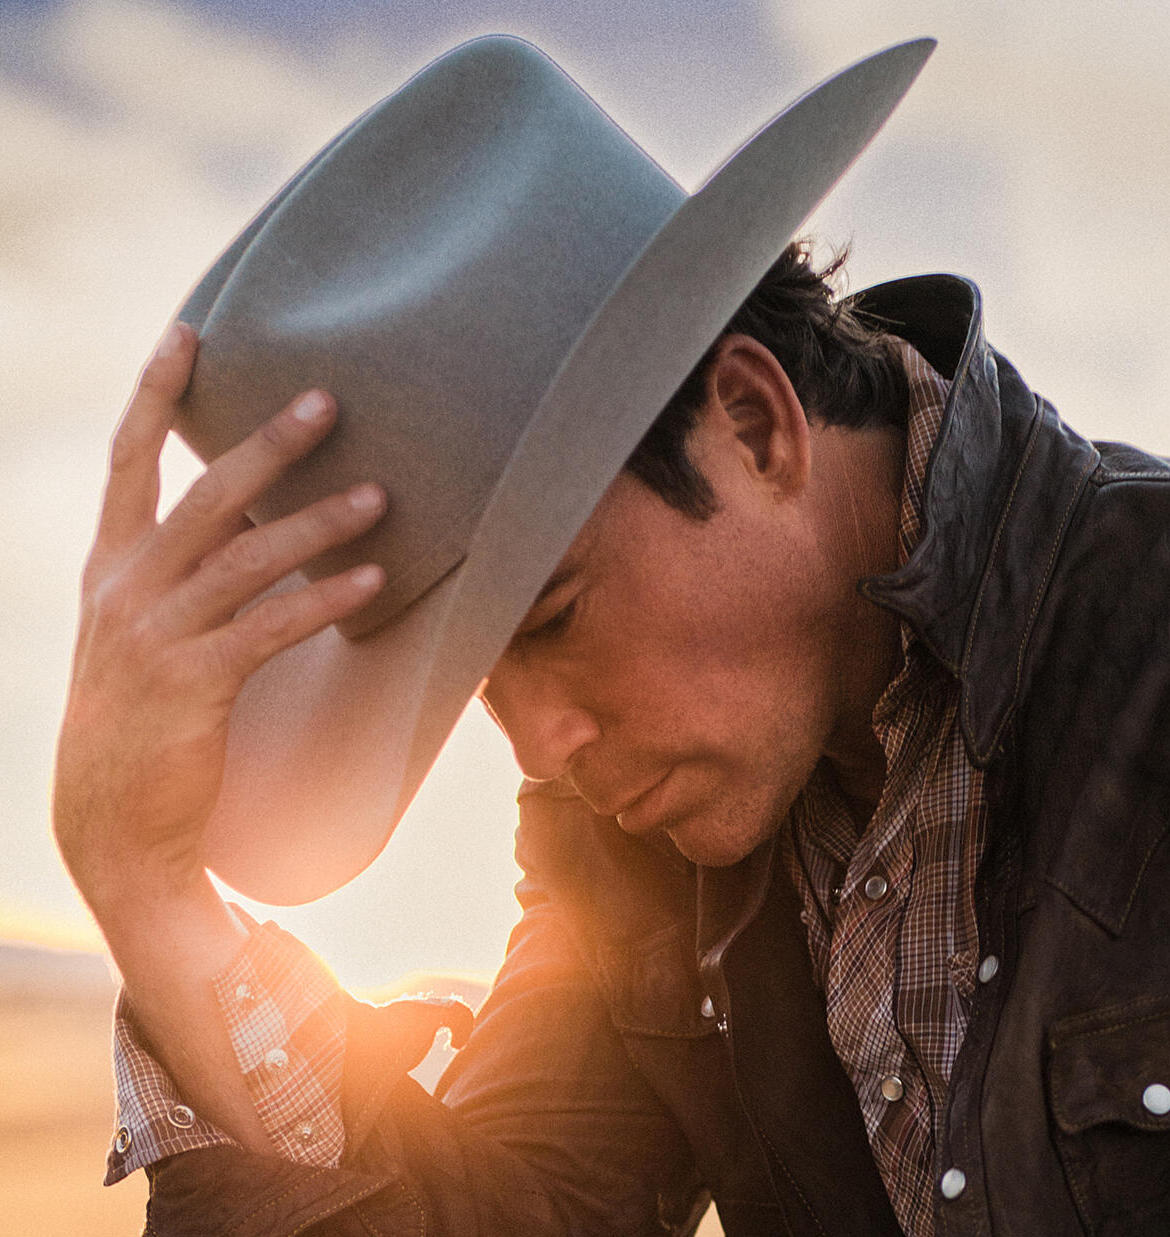  Clay Walker And Wife Jessica Lose Sixth Child To Miscarriage